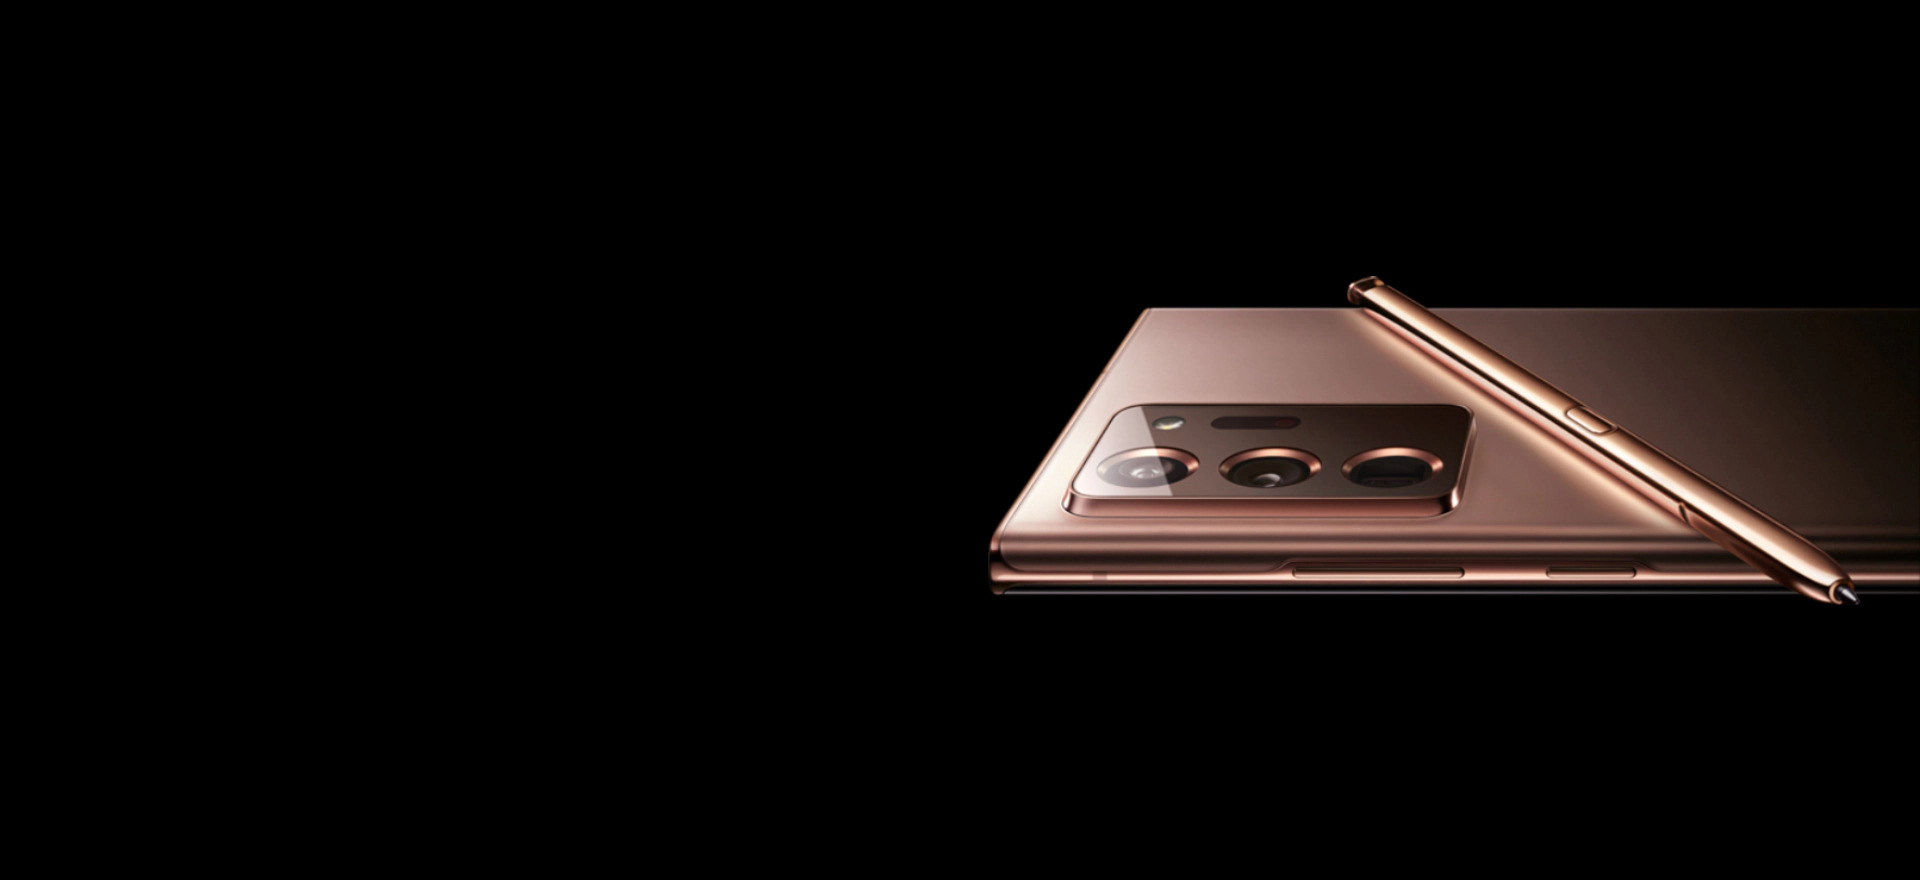 Samsung accidently posted the Note20 Ultra in Mystic Bronze on their Russian website. It looks great!